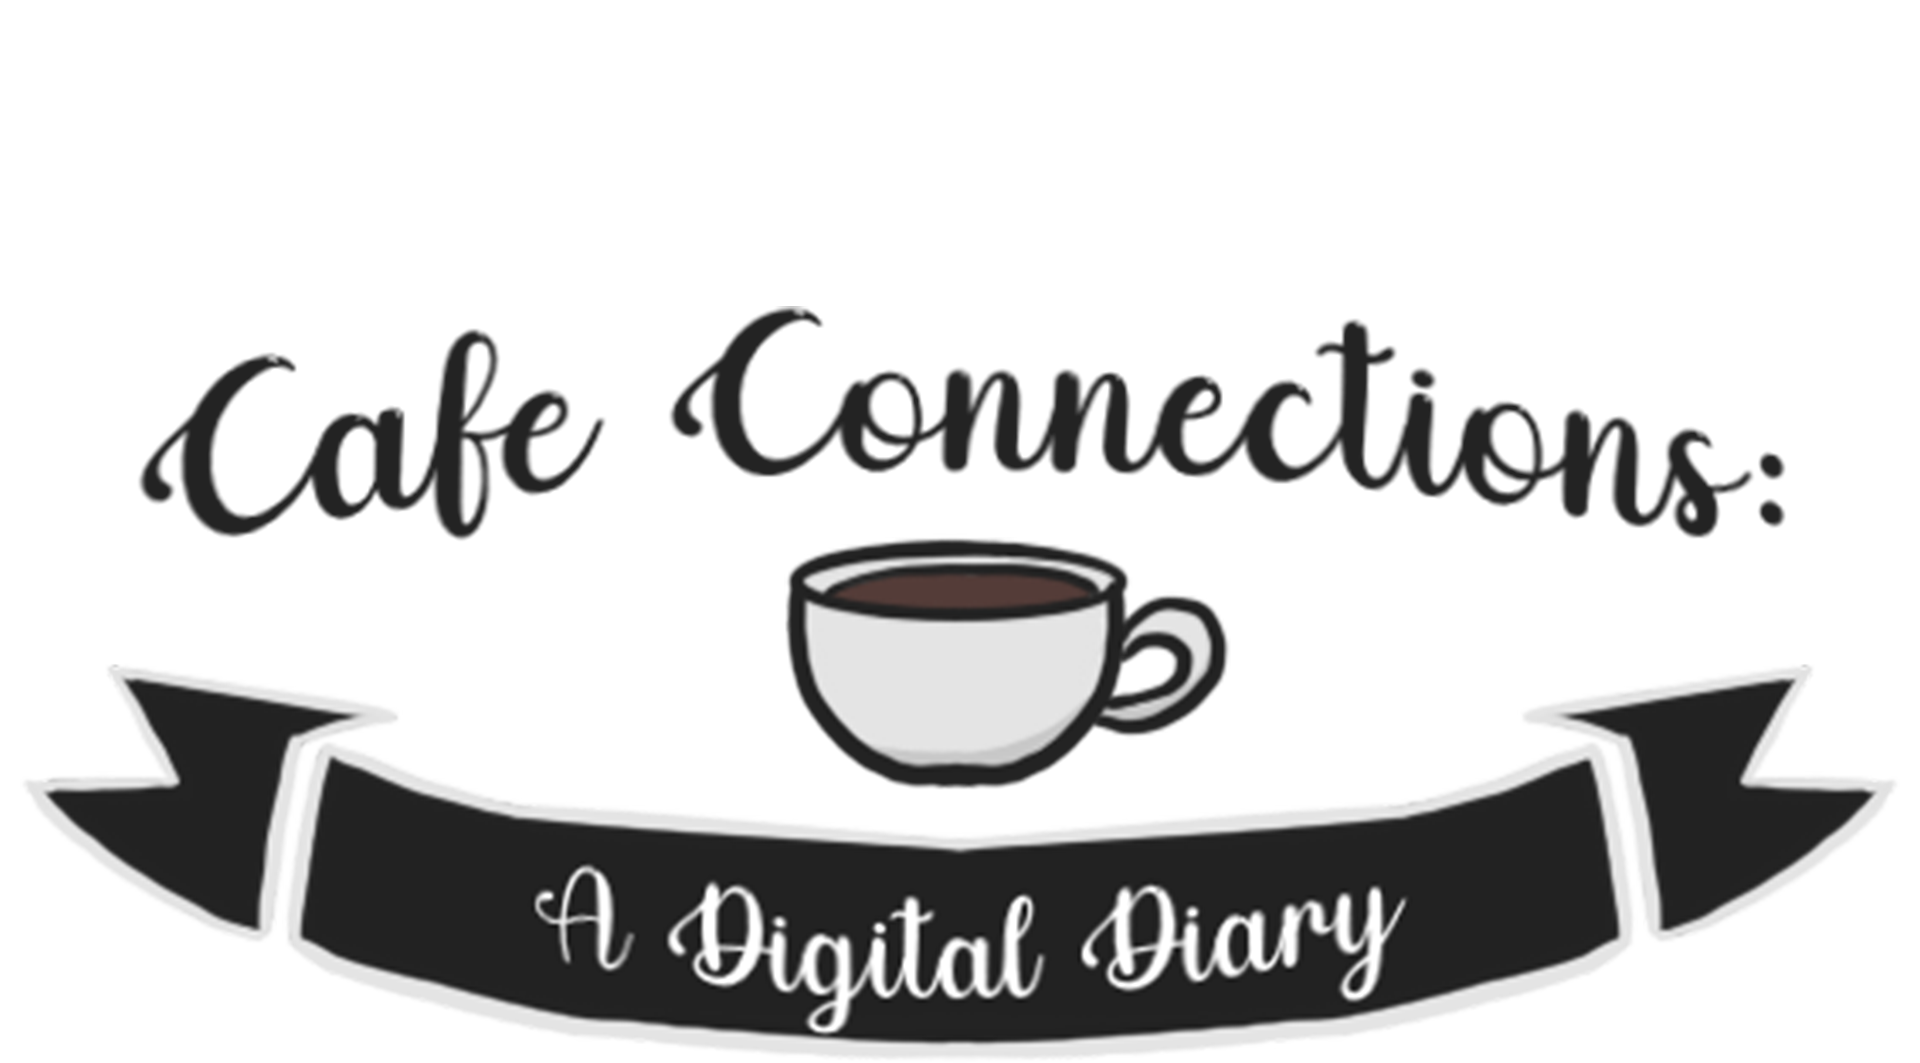 Cafe Connections: A Digital Diary